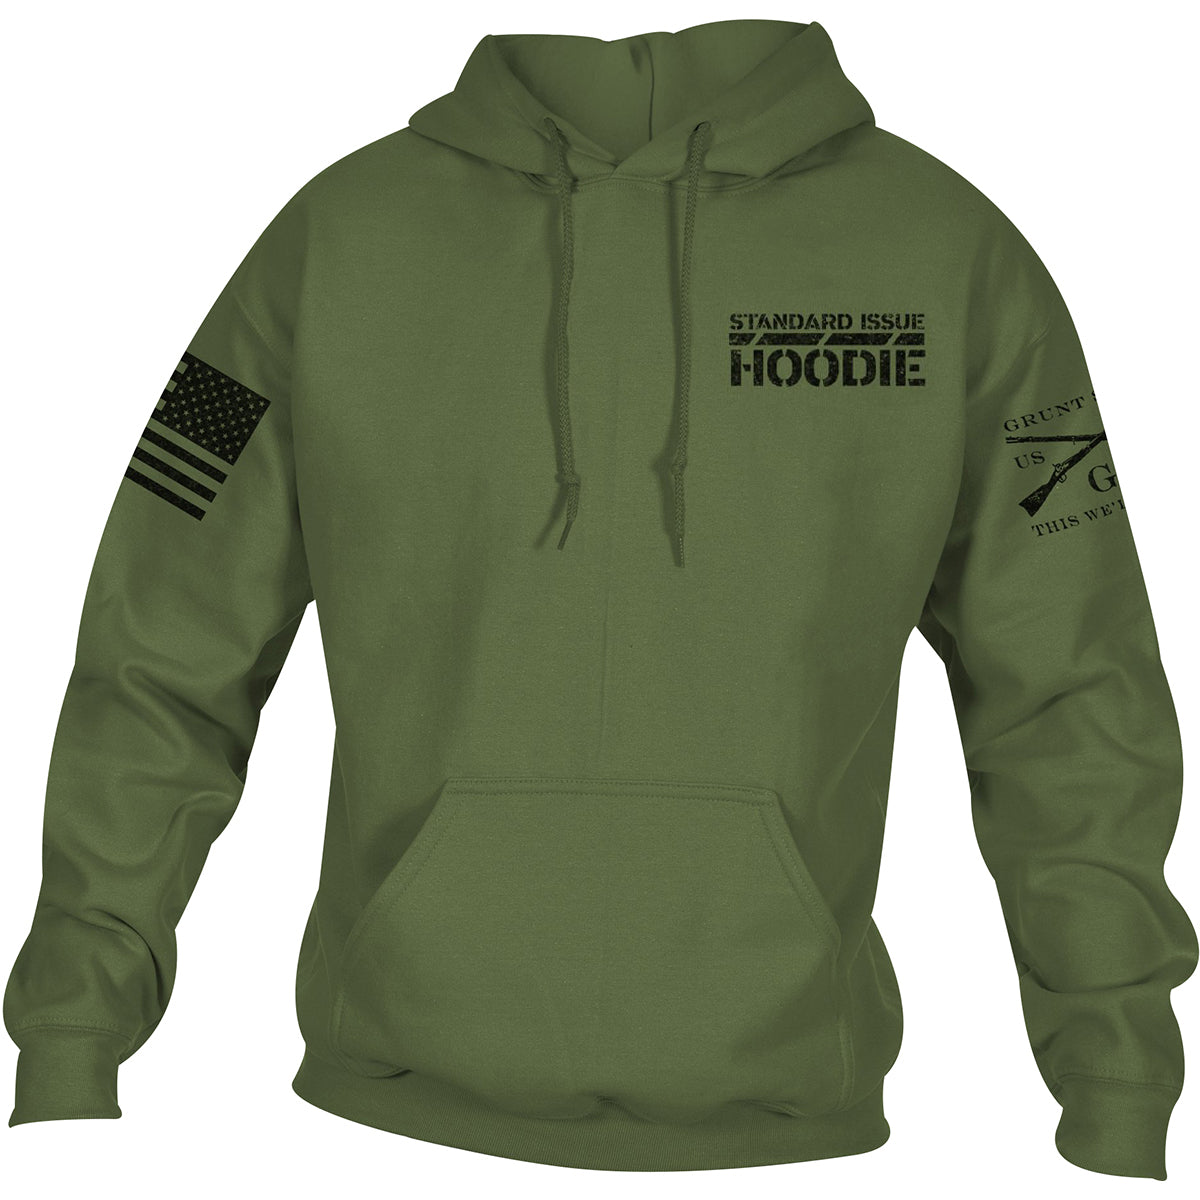 Grunt Style This Is My Hoodie Pullover Hoodie - Military Green Grunt Style